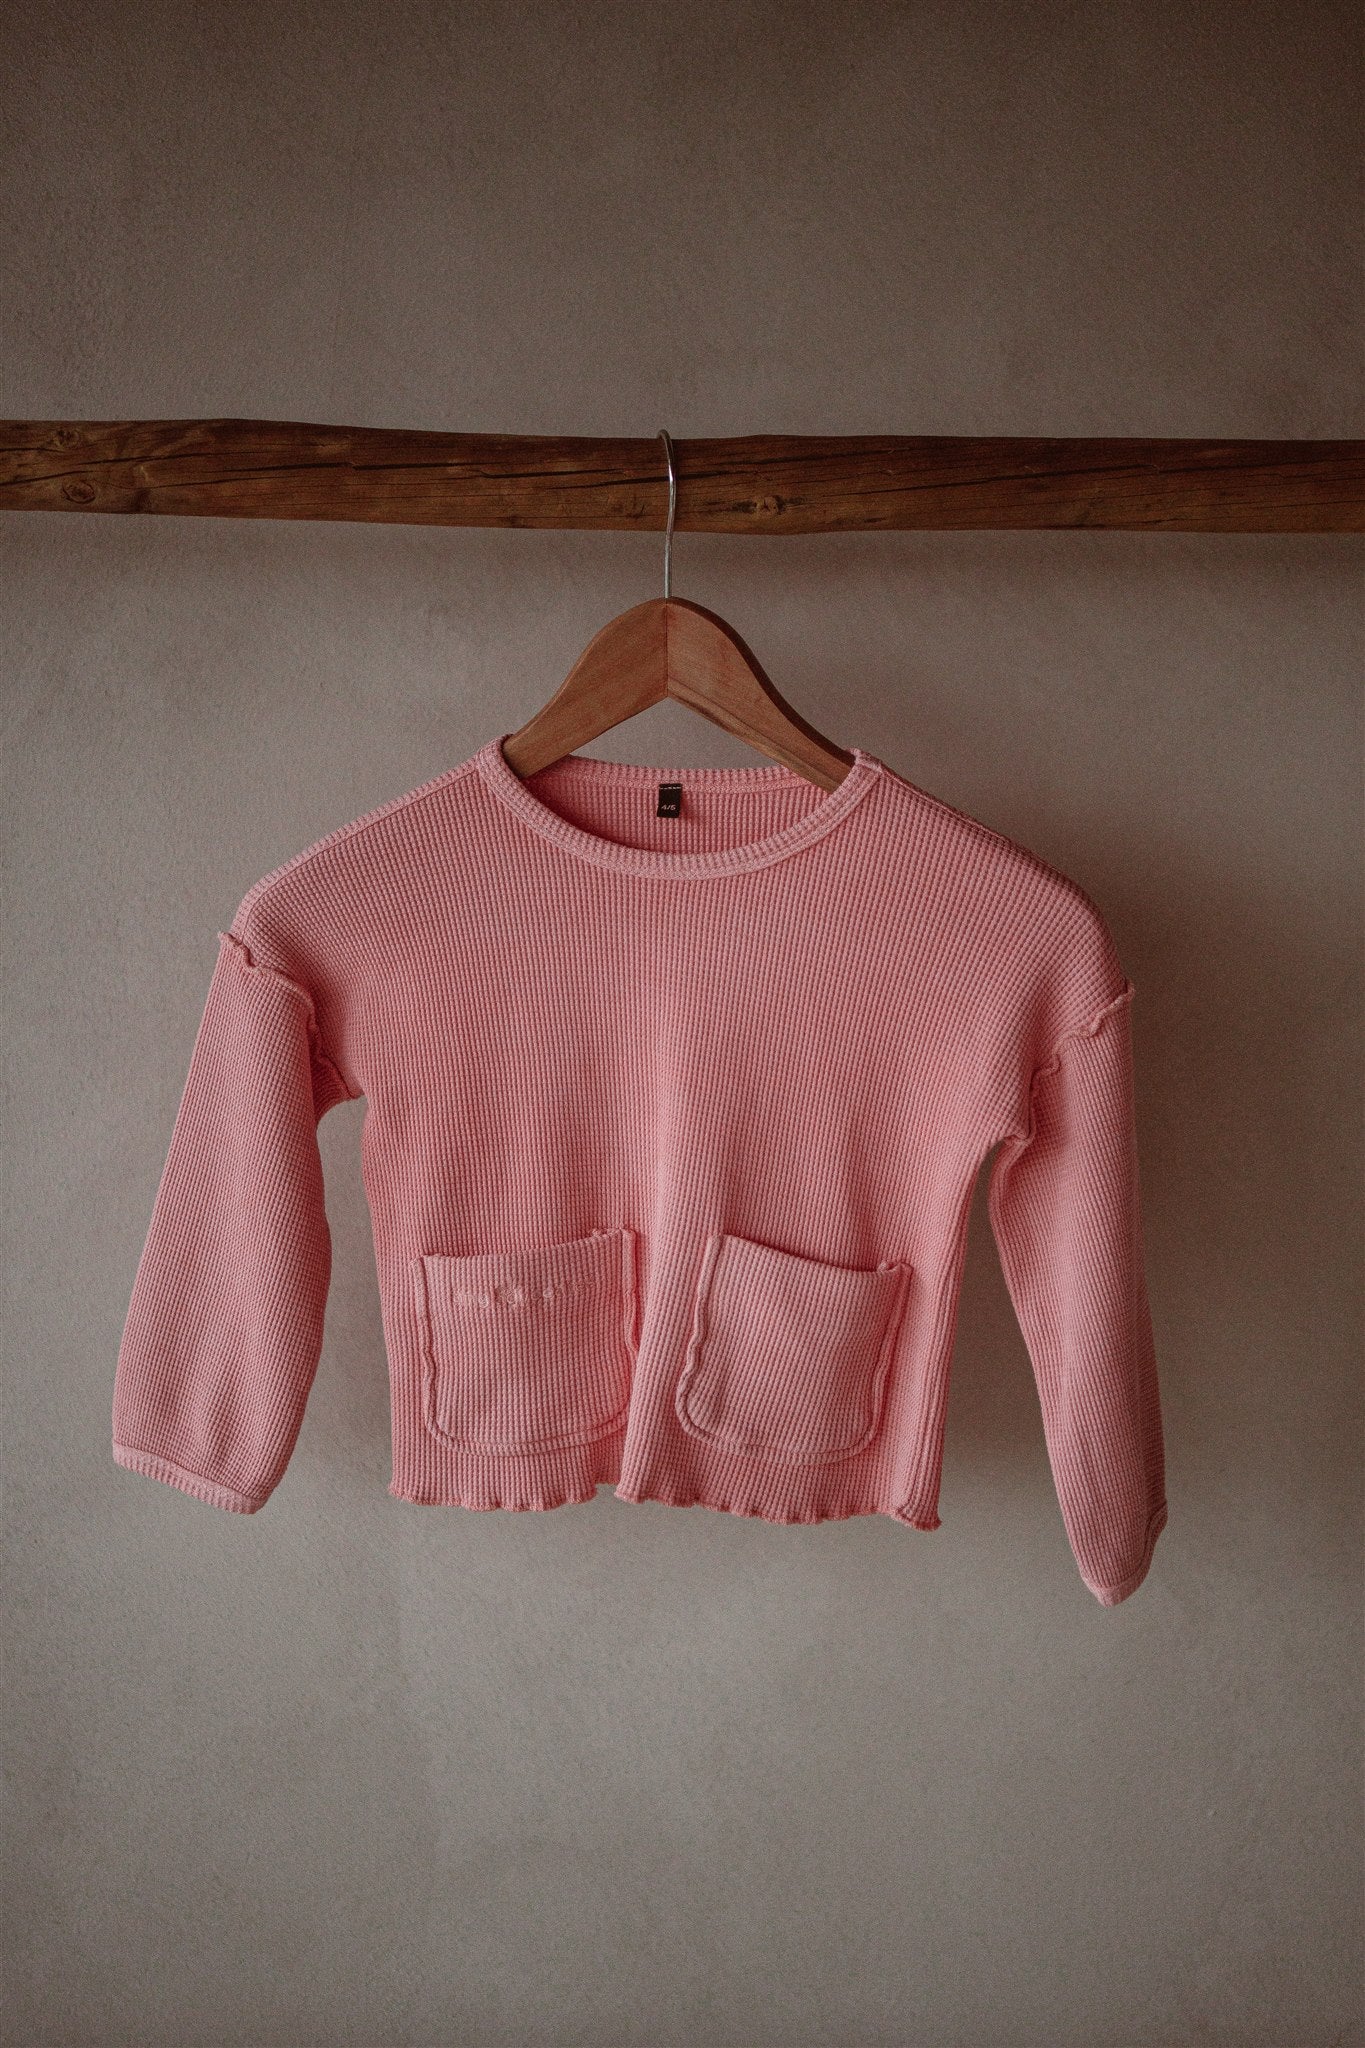 The Dreamy Top - ROSE